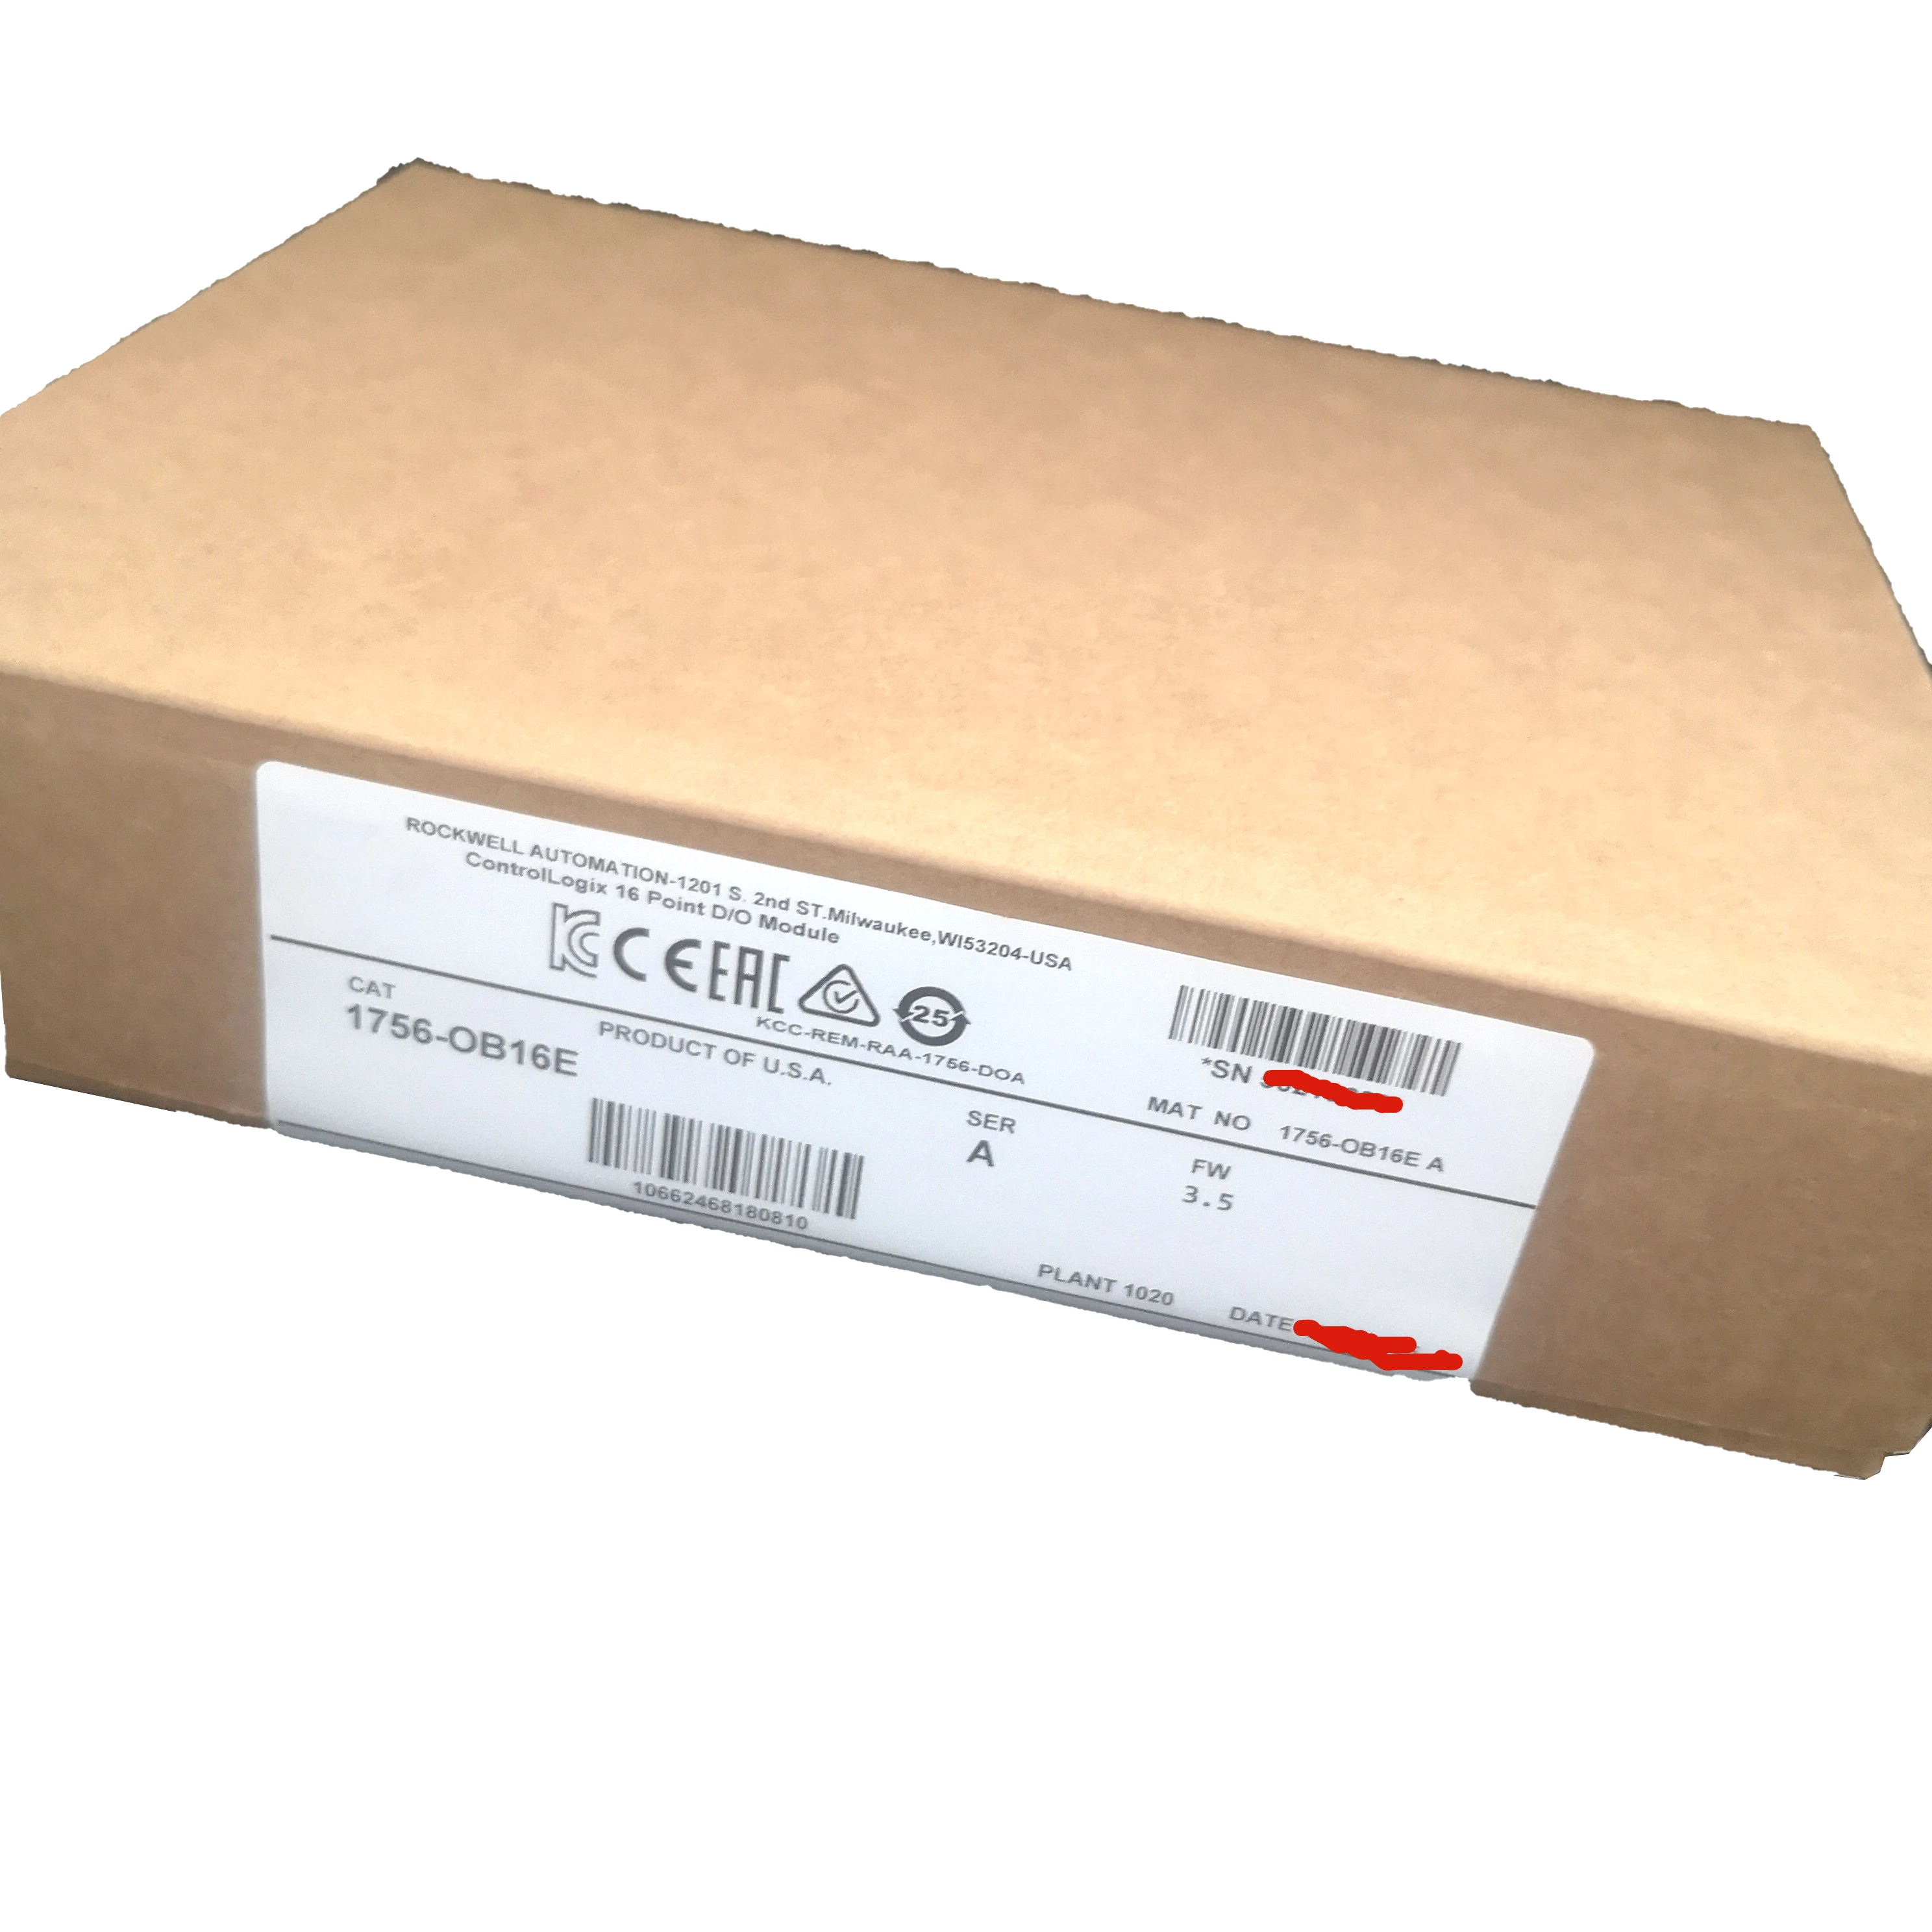 

New Original In BOX 1756-OB16E {Warehouse stock} 1 Year Warranty Shipment within 24 hours